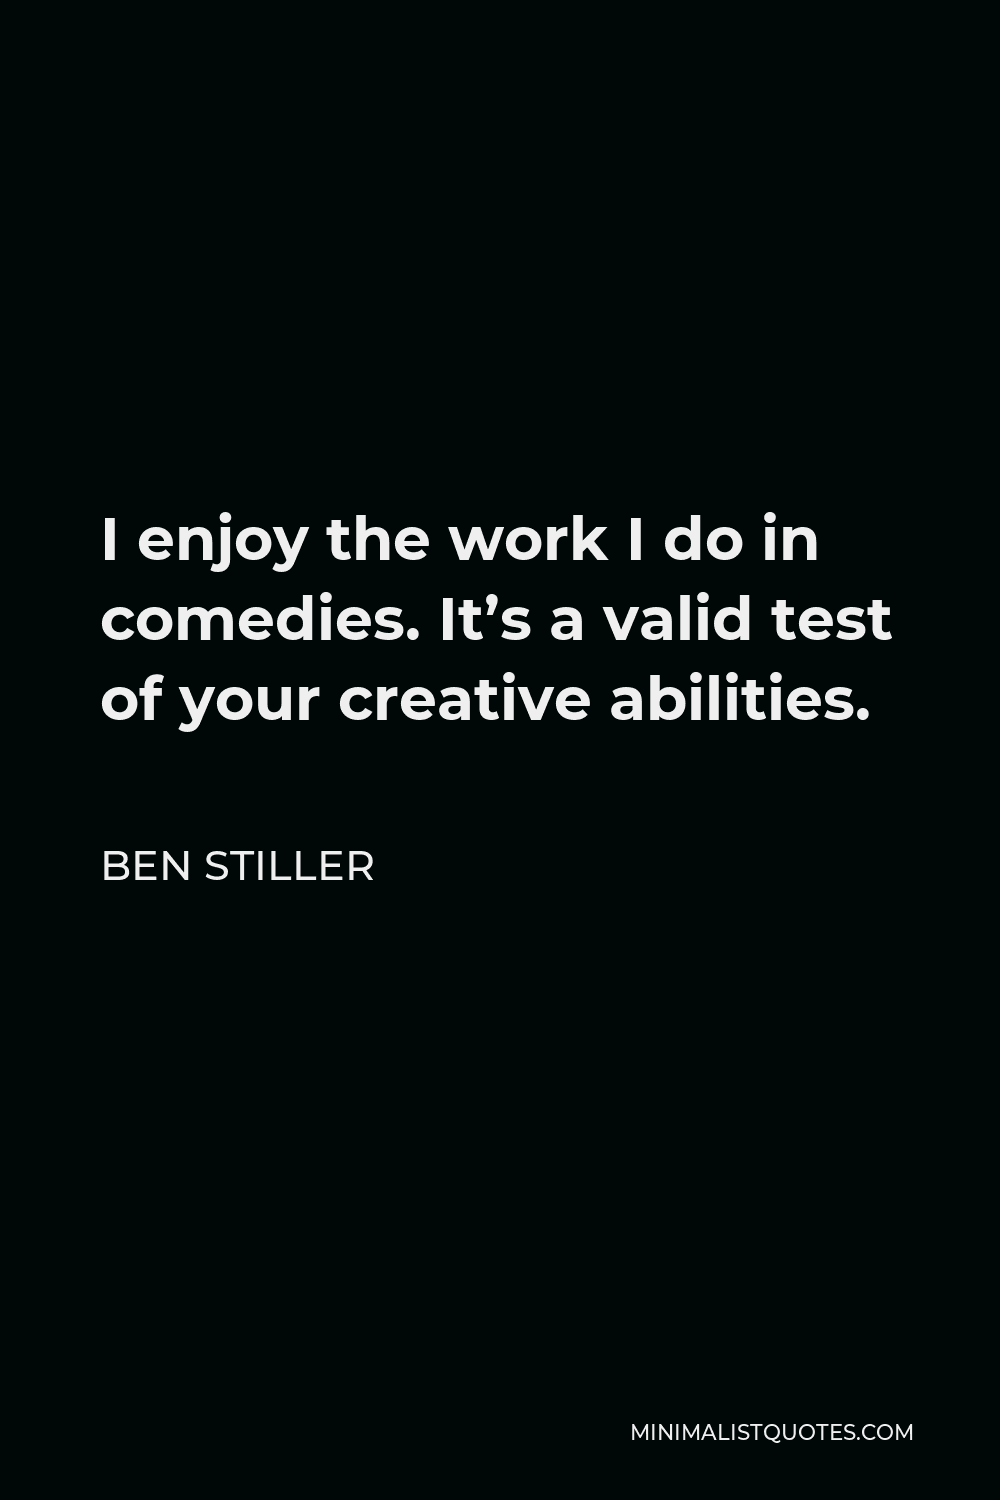 Ben Stiller Quote - I enjoy the work I do in comedies. It’s a valid test of your creative abilities.